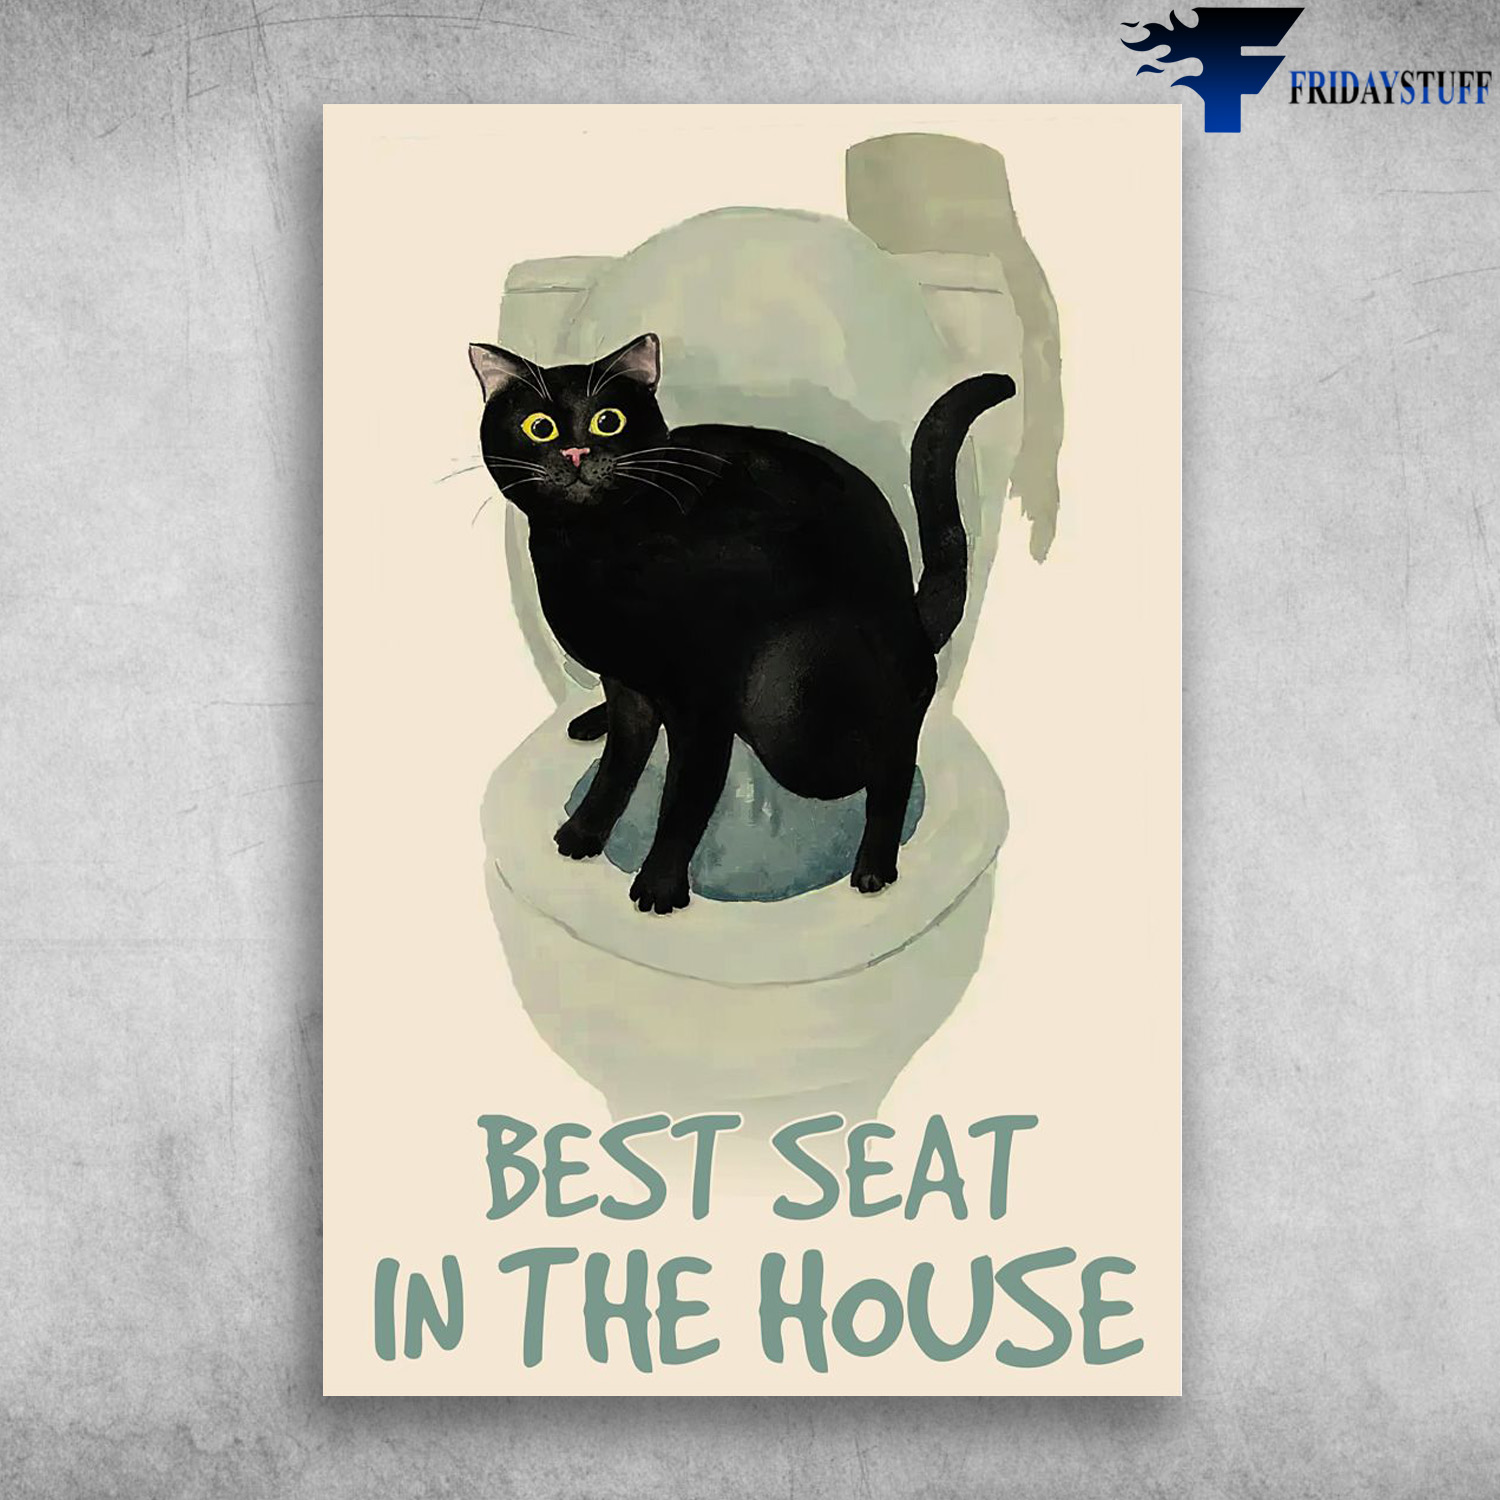 Black Cat On The Toilet Bowl - Best Seat In The House